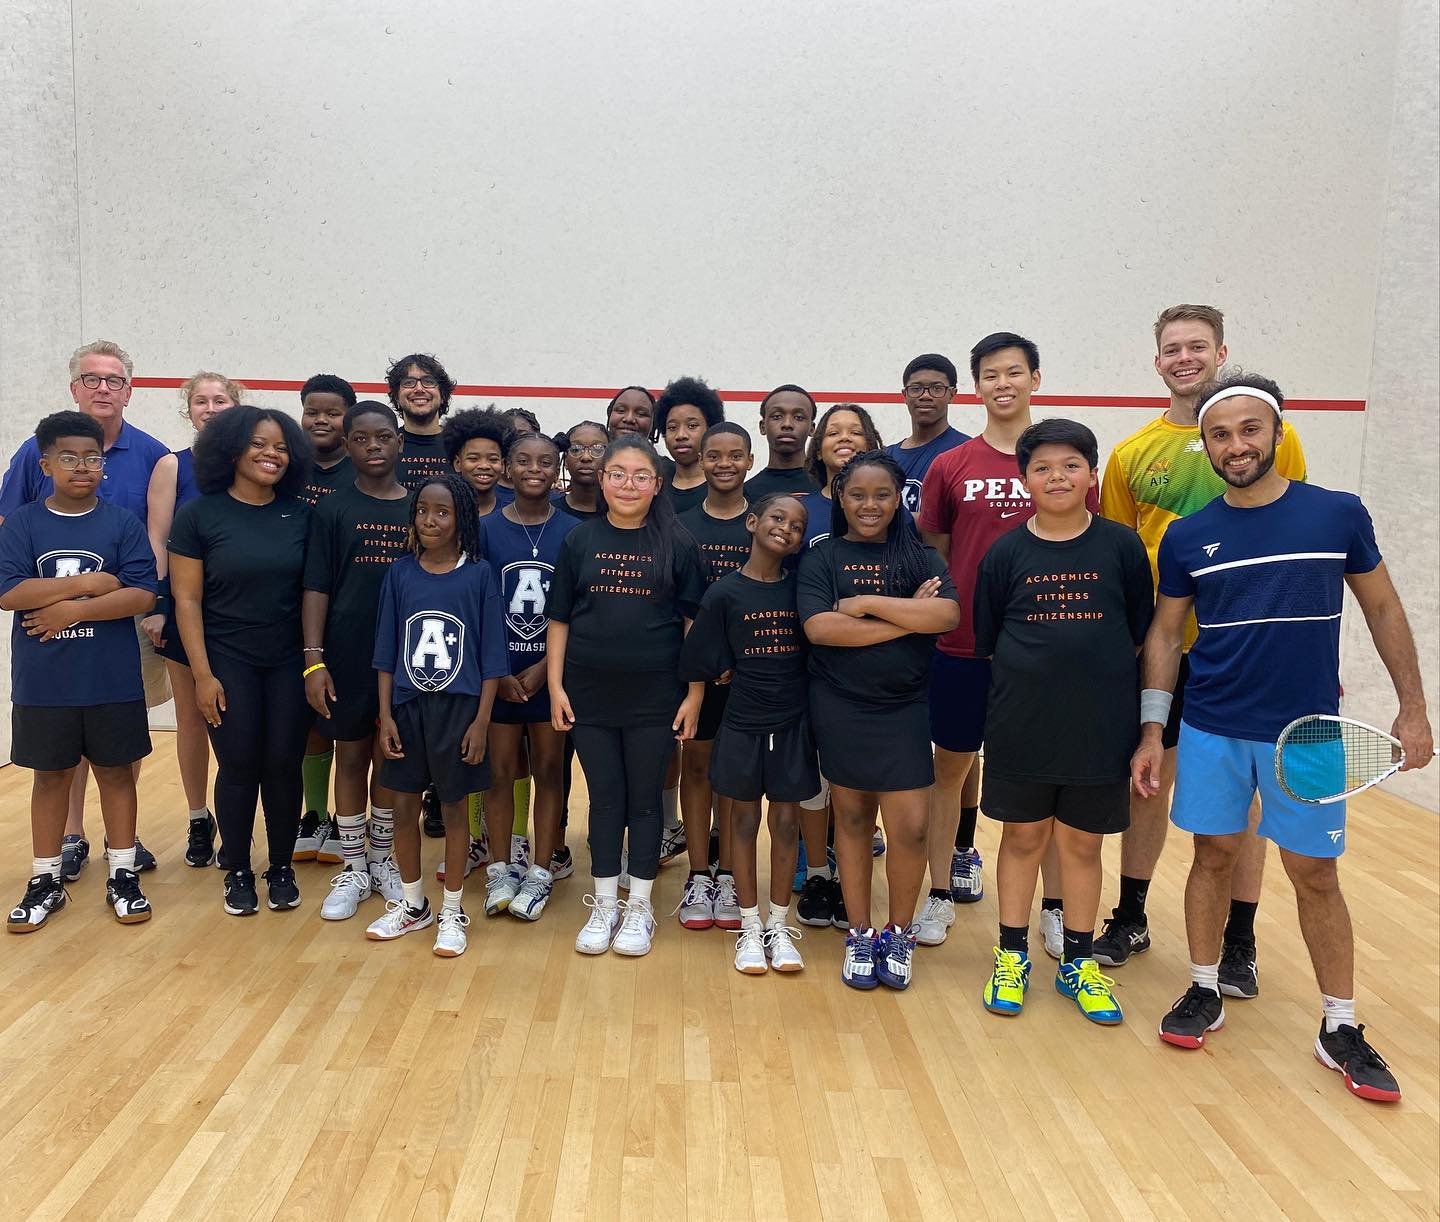 Celebrating 10 years of A+ Squash - NSL Style! 
A huge thank you to everyone who made the A+ Cup extra special this year! It was a whirlwind week with @atlantacommunitysquash hosting the club championships, students hit with the pros, and an action-p